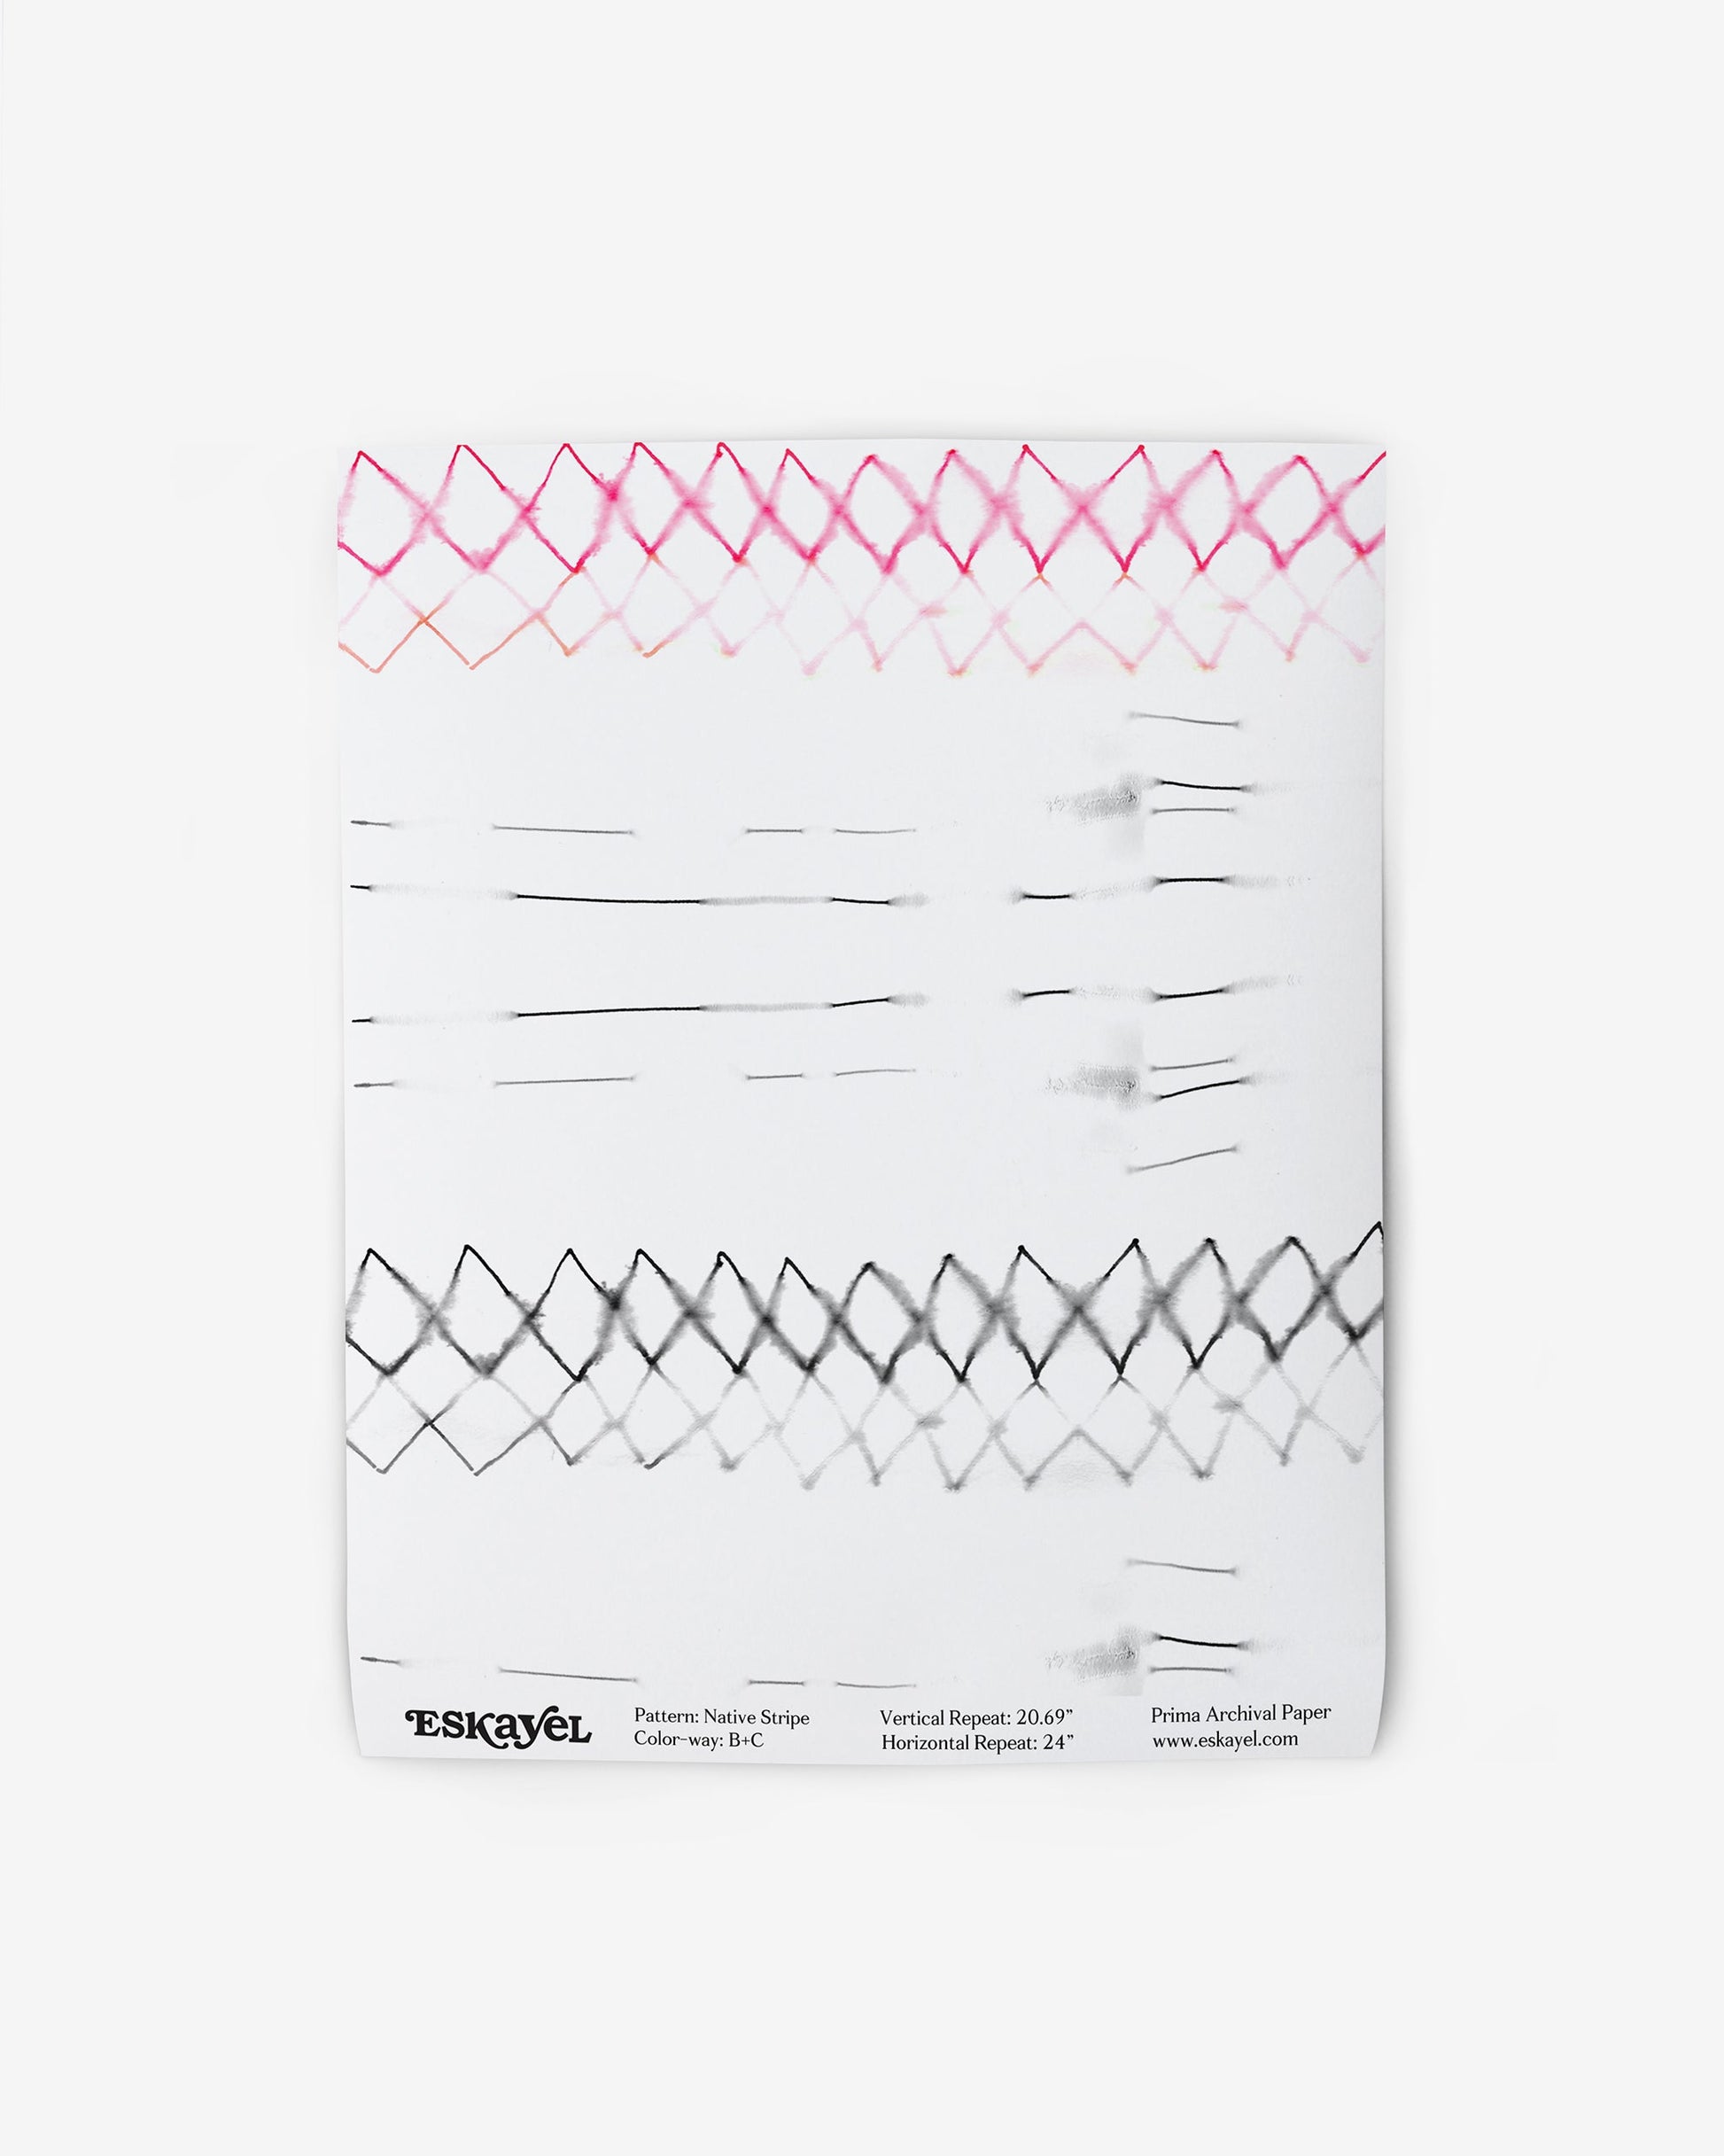 A white piece of paper with a graphic pattern of Native Stripe Wallpaper Black + Crimson on it